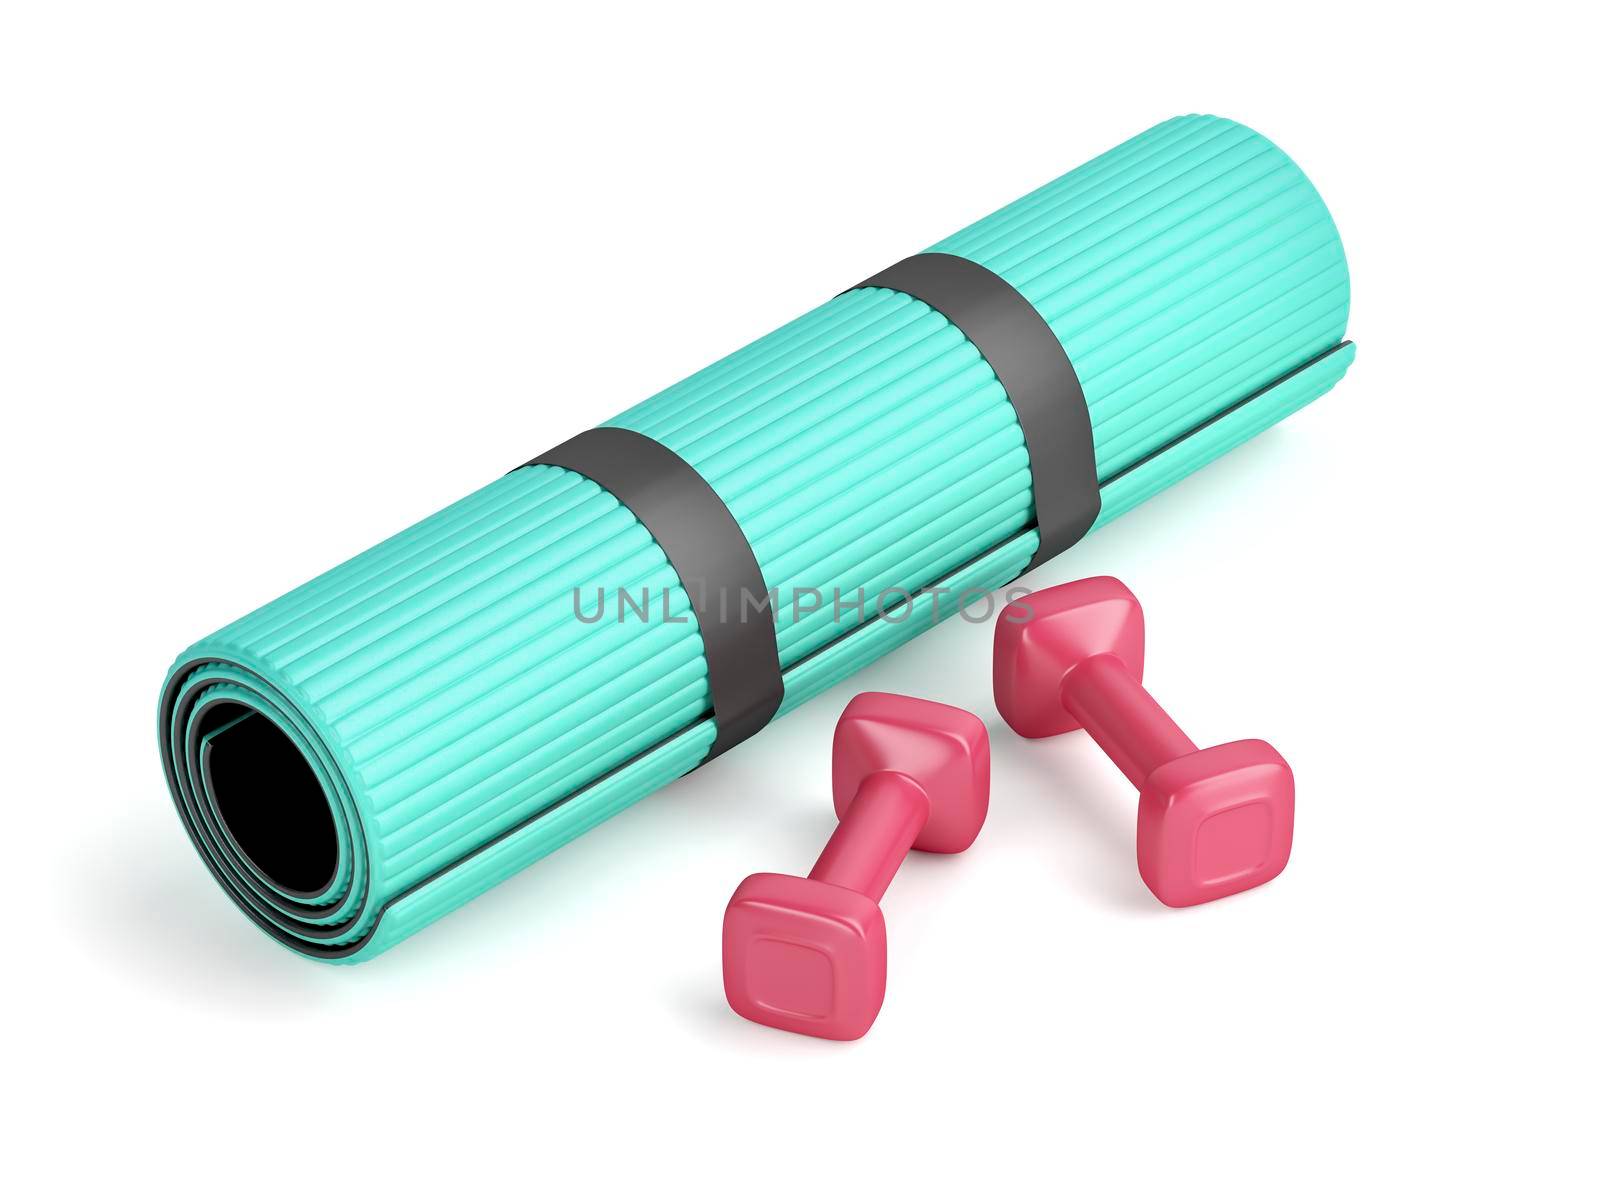 Dumbbells and exercise mat
 by magraphics